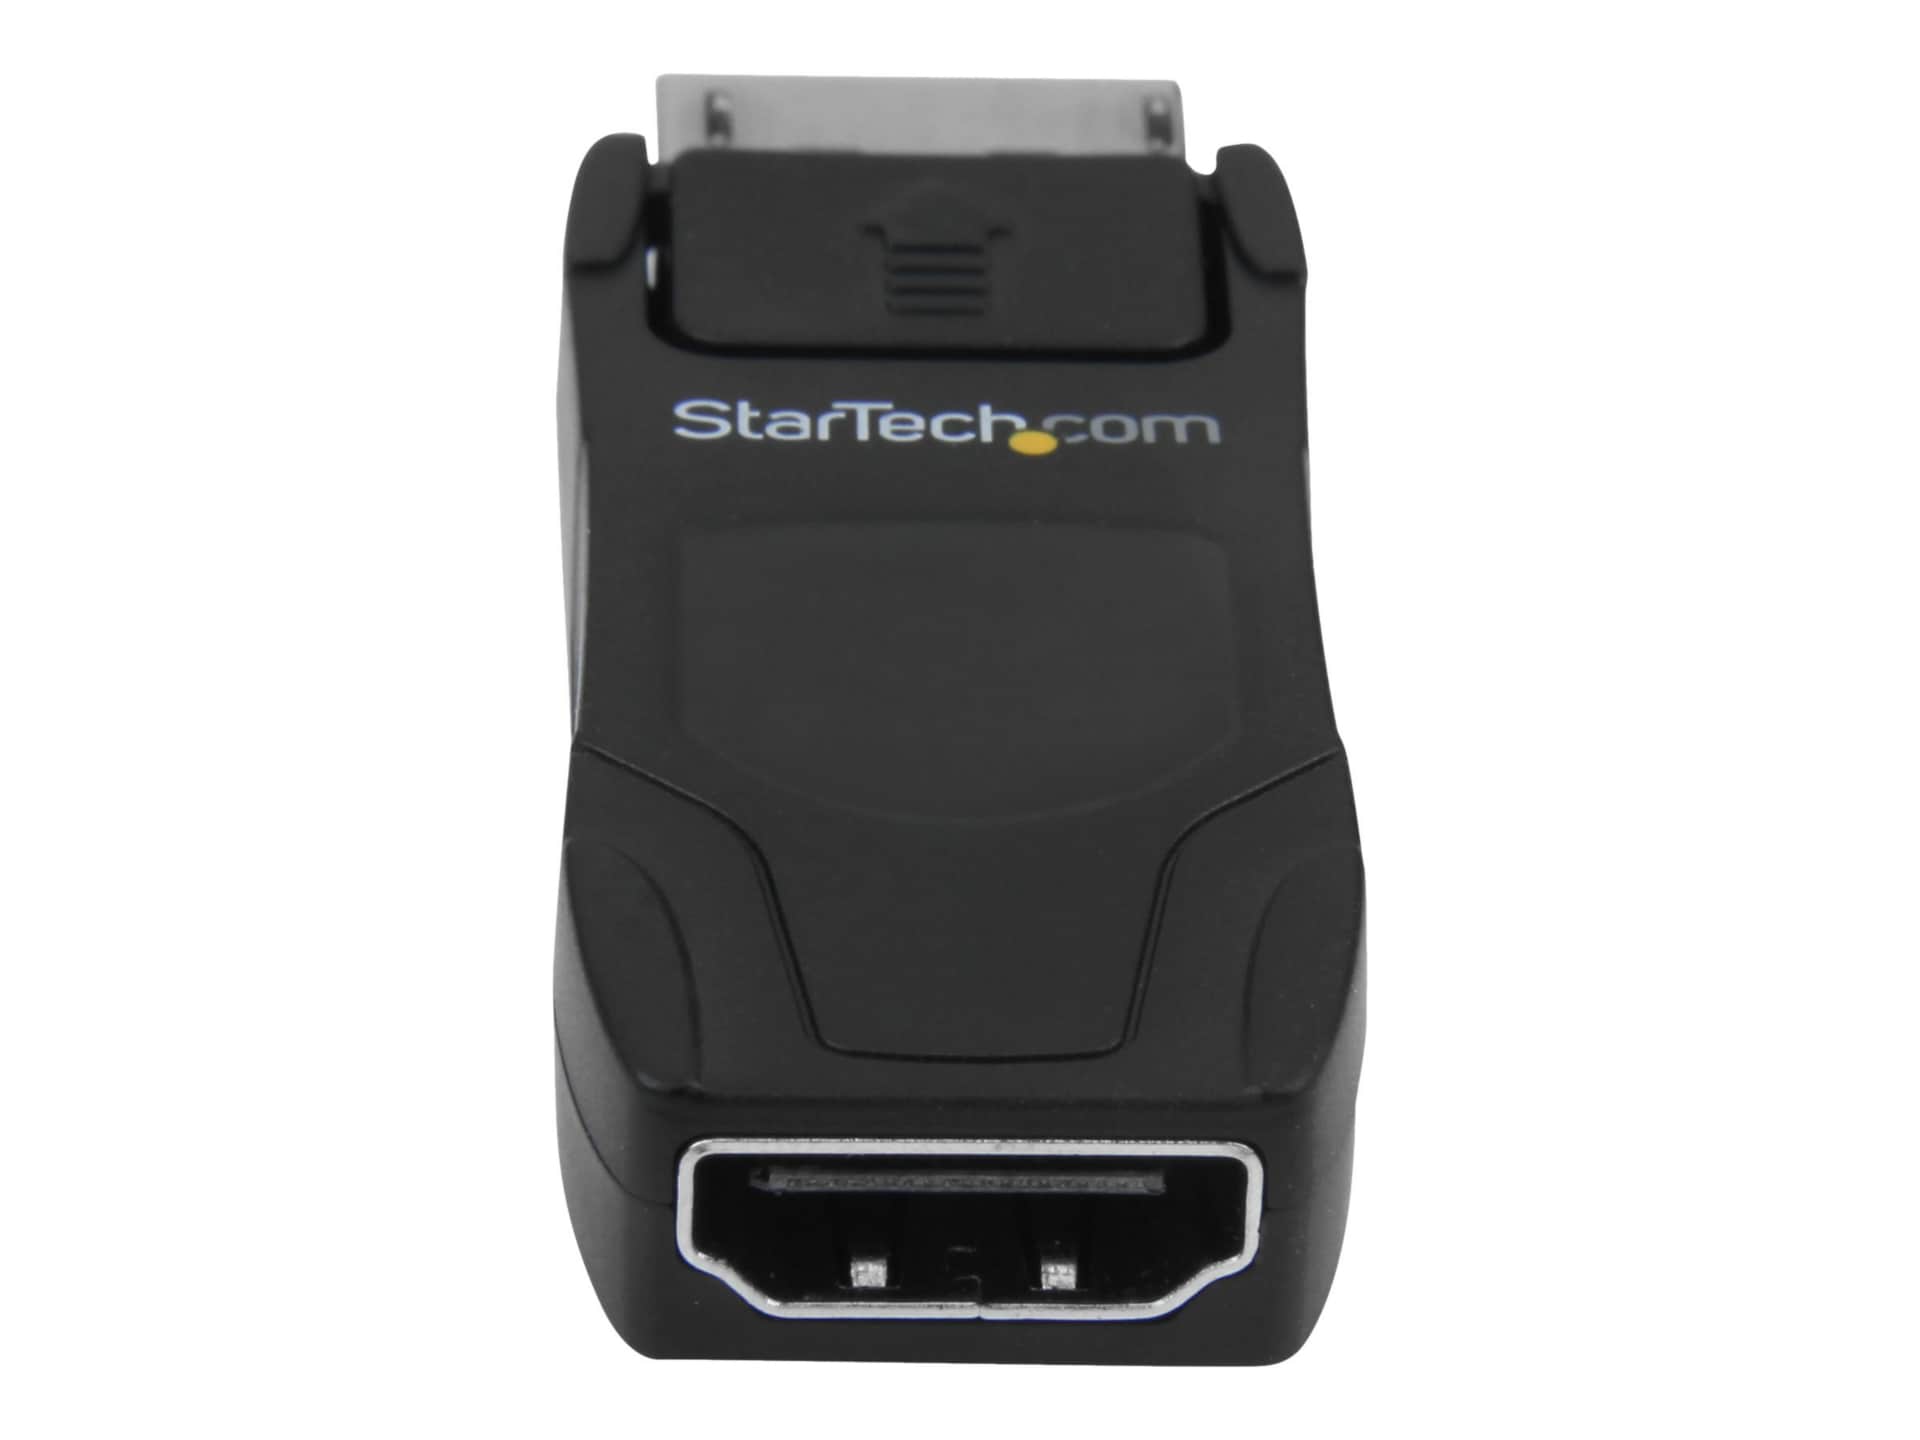 StarTech.com DisplayPort to HDMI Adapter - UHD 4K DP 1.2 to HDMI Monitor Video Converter - Compact